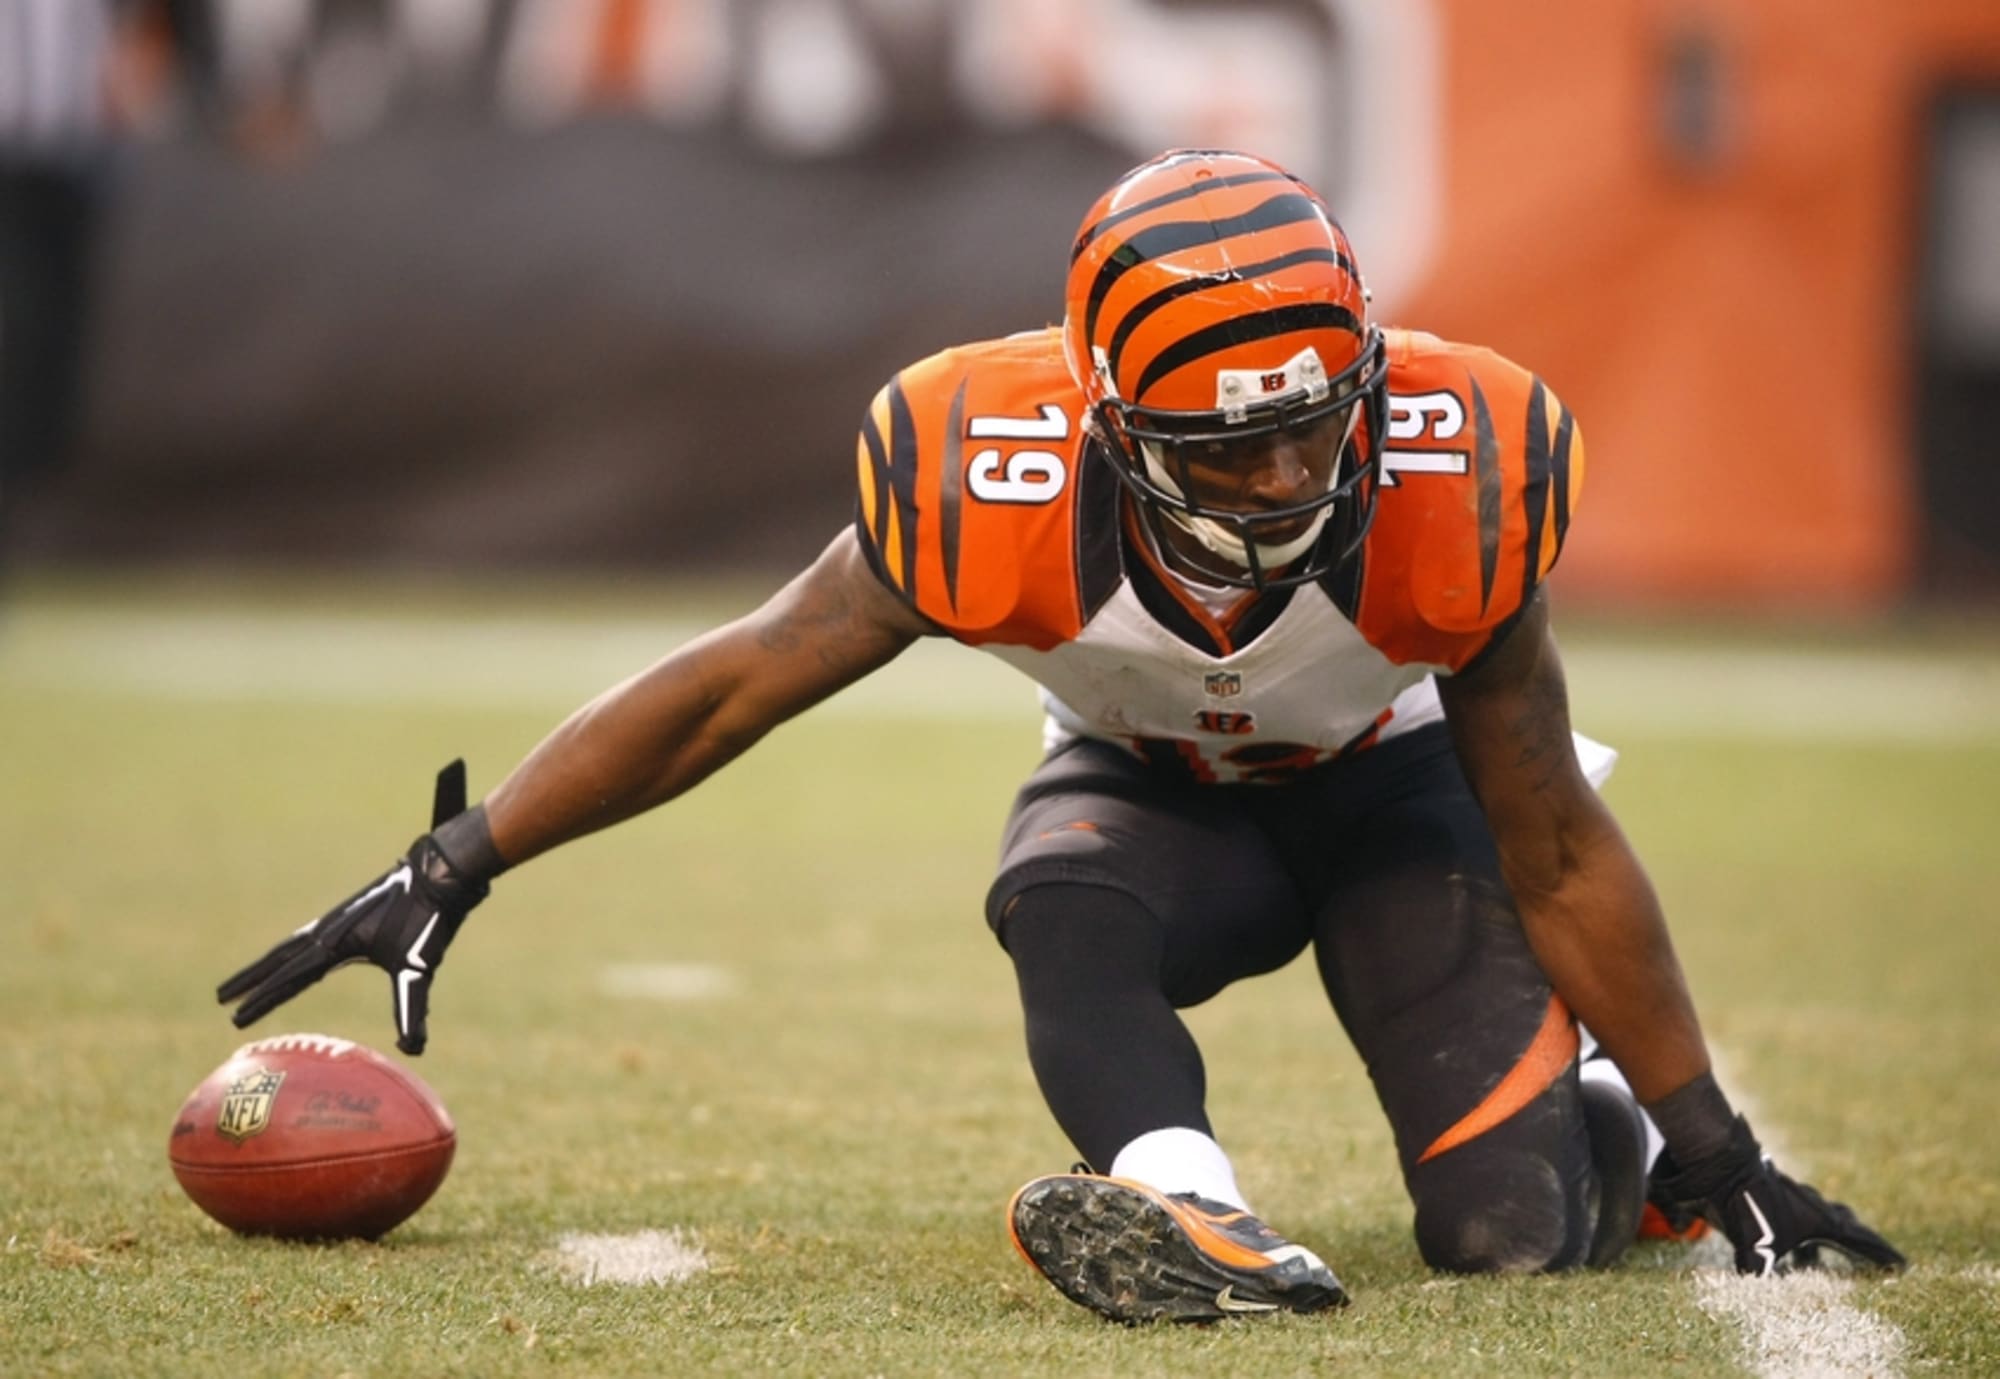 NFL Standings Can The Cincinnati Bengals Make The Playoffs?